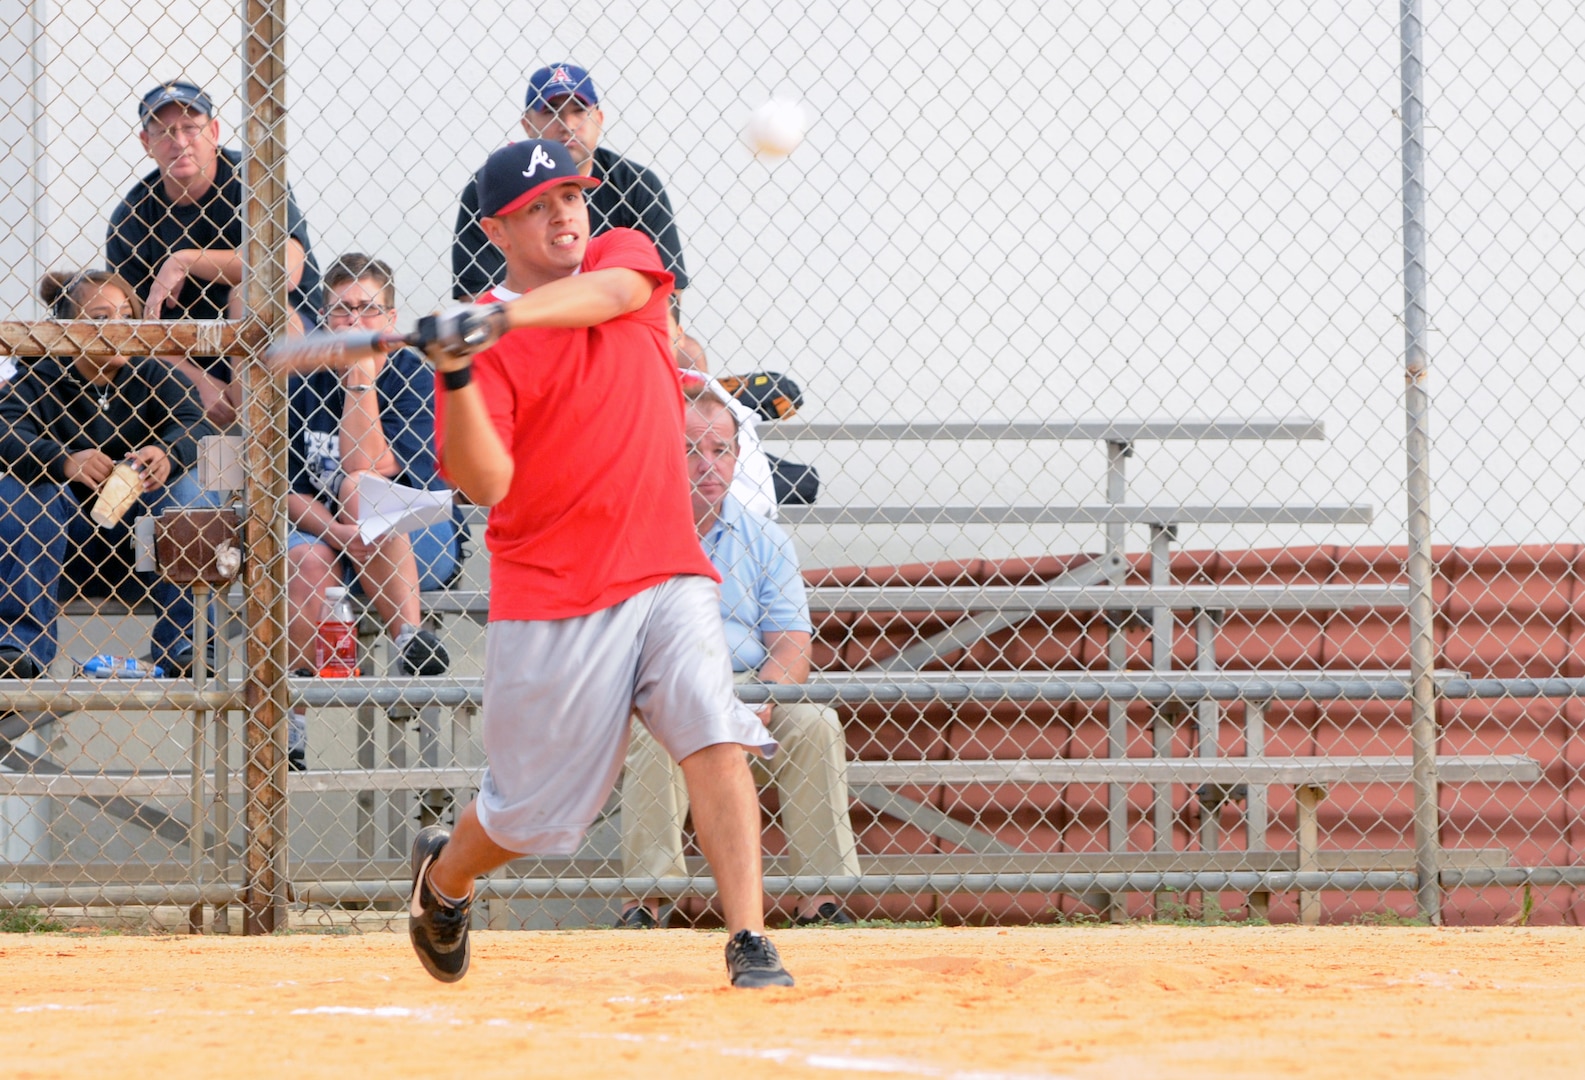 Elliott Ortiz, 12th Services Squadron intramural softball team second baseman, swings for the fences during the playoff game against the Air Force Occupational Measurement Squadron team on Monday at Rambler Field. (U.S. Air Force photo by Steve White)